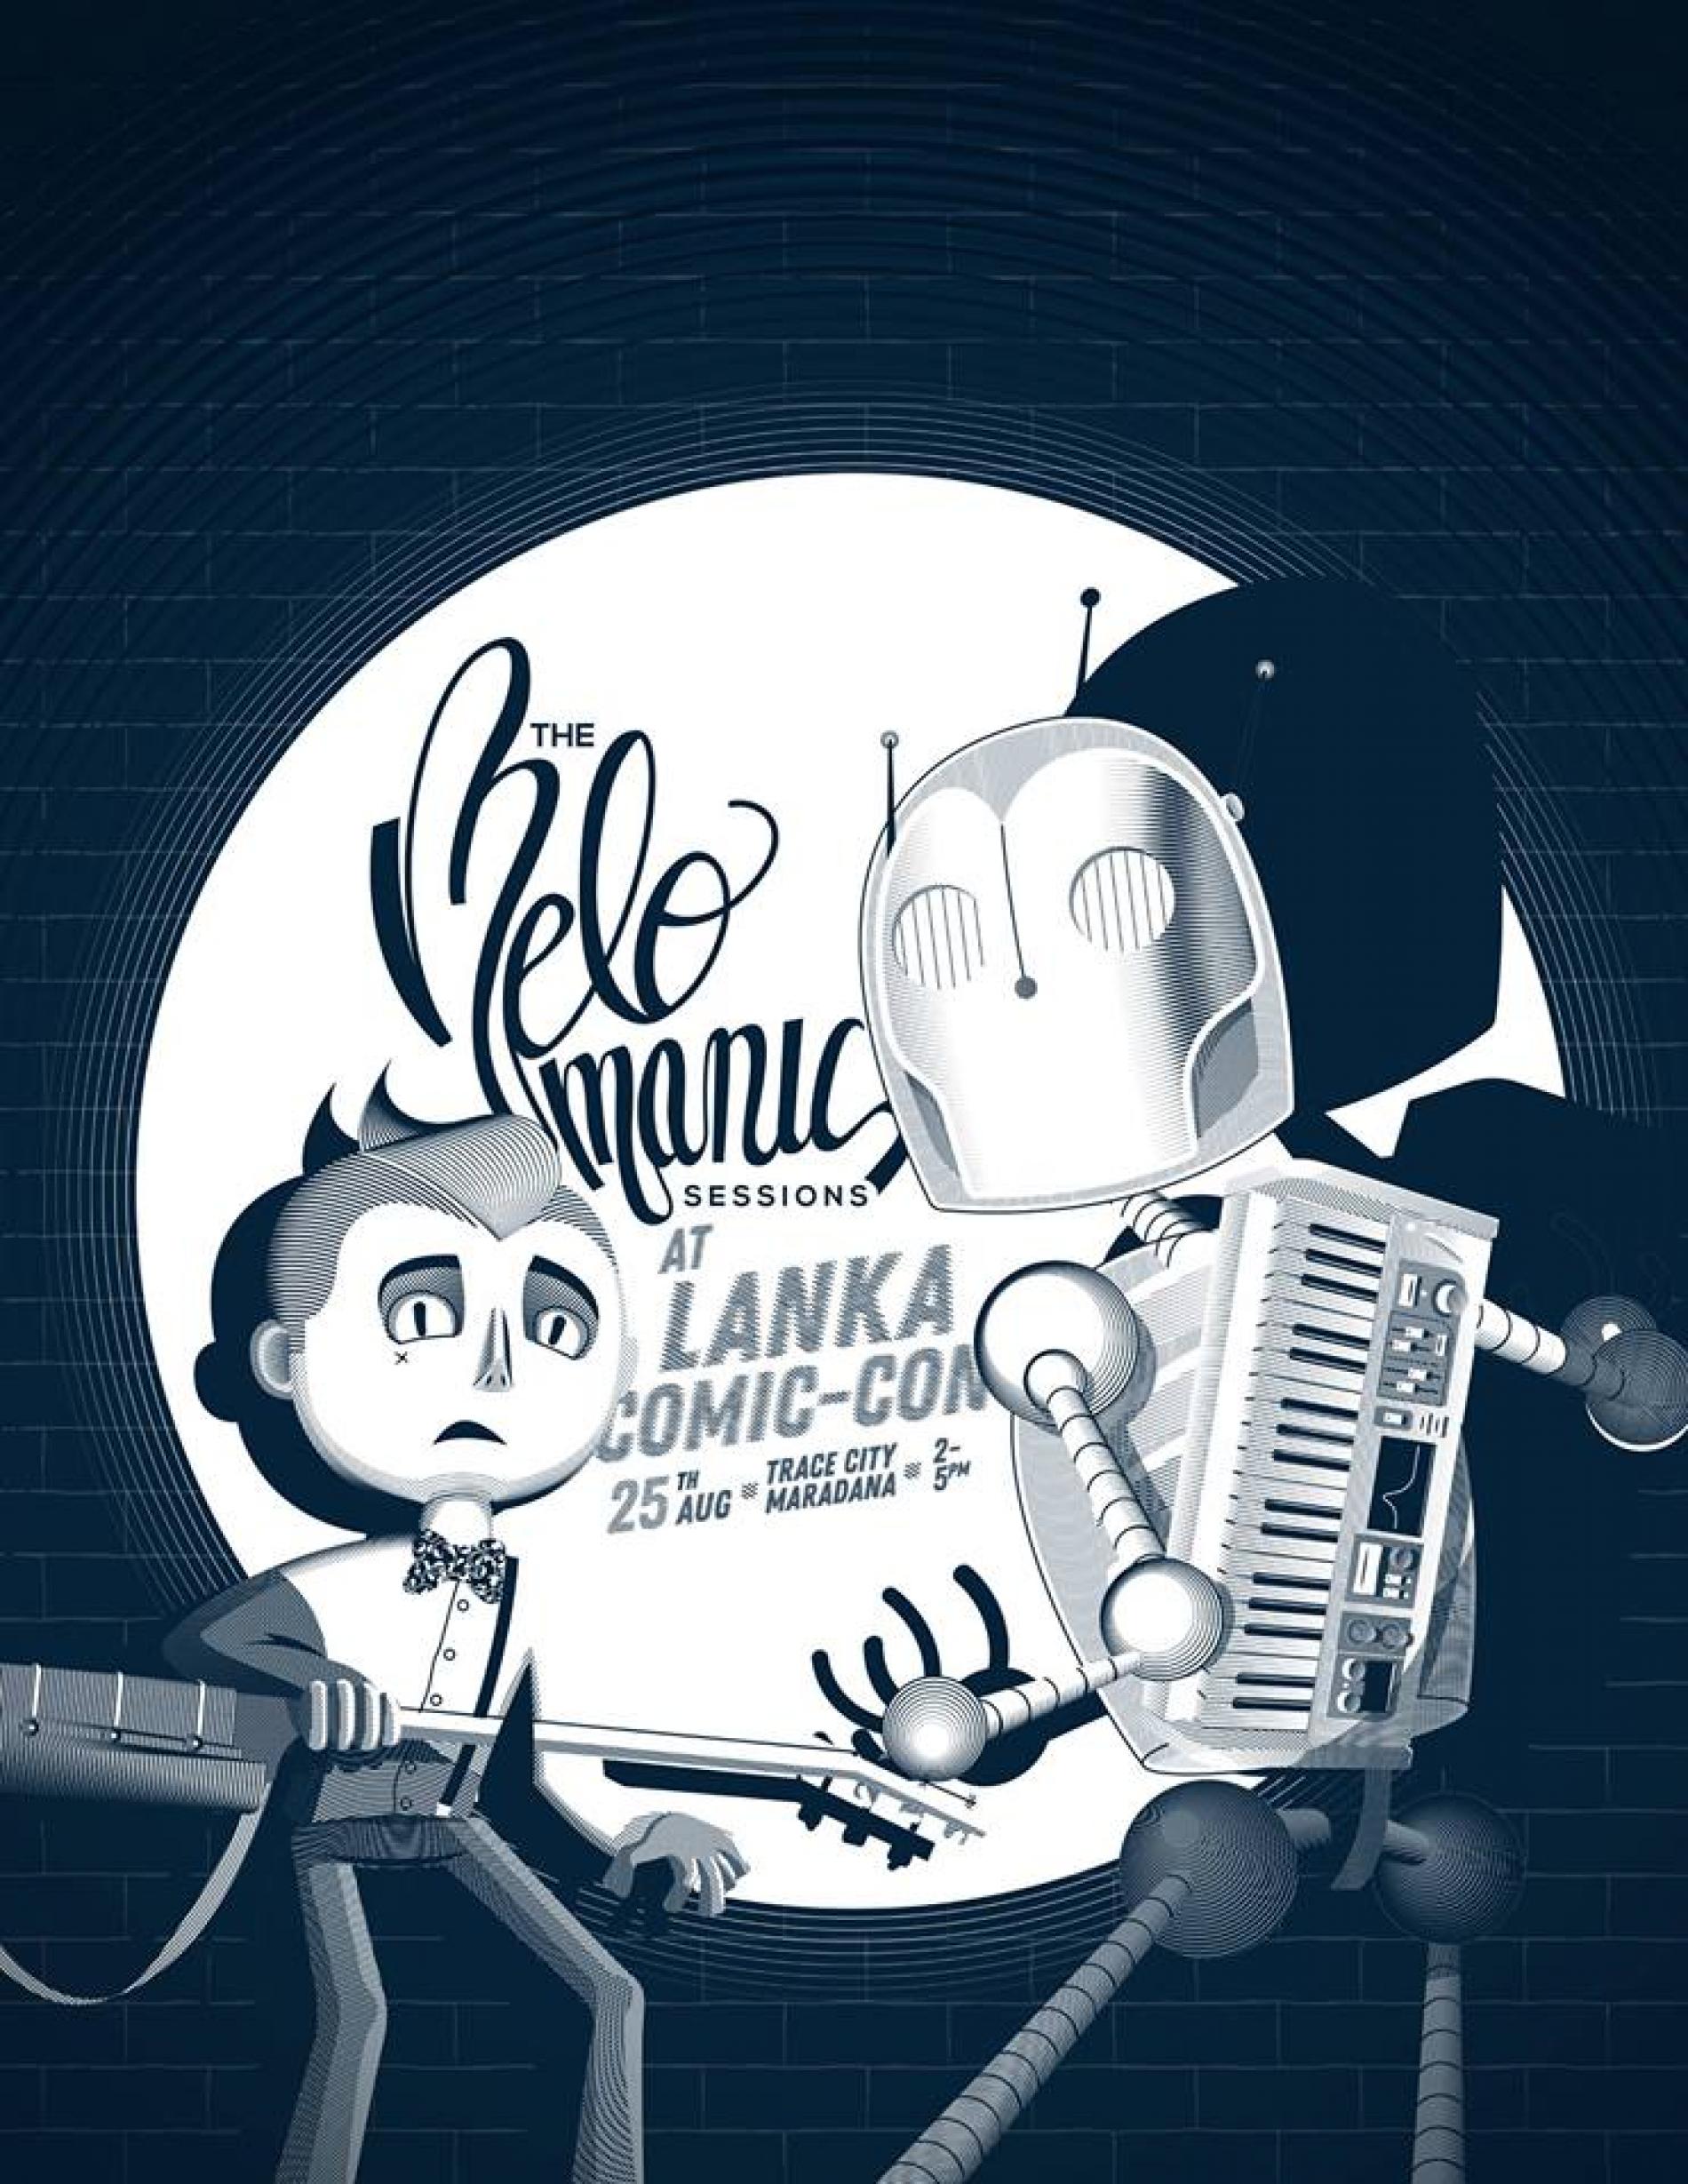 Melomanic Sessions Returns And This Time @ Lanka Comic Con!